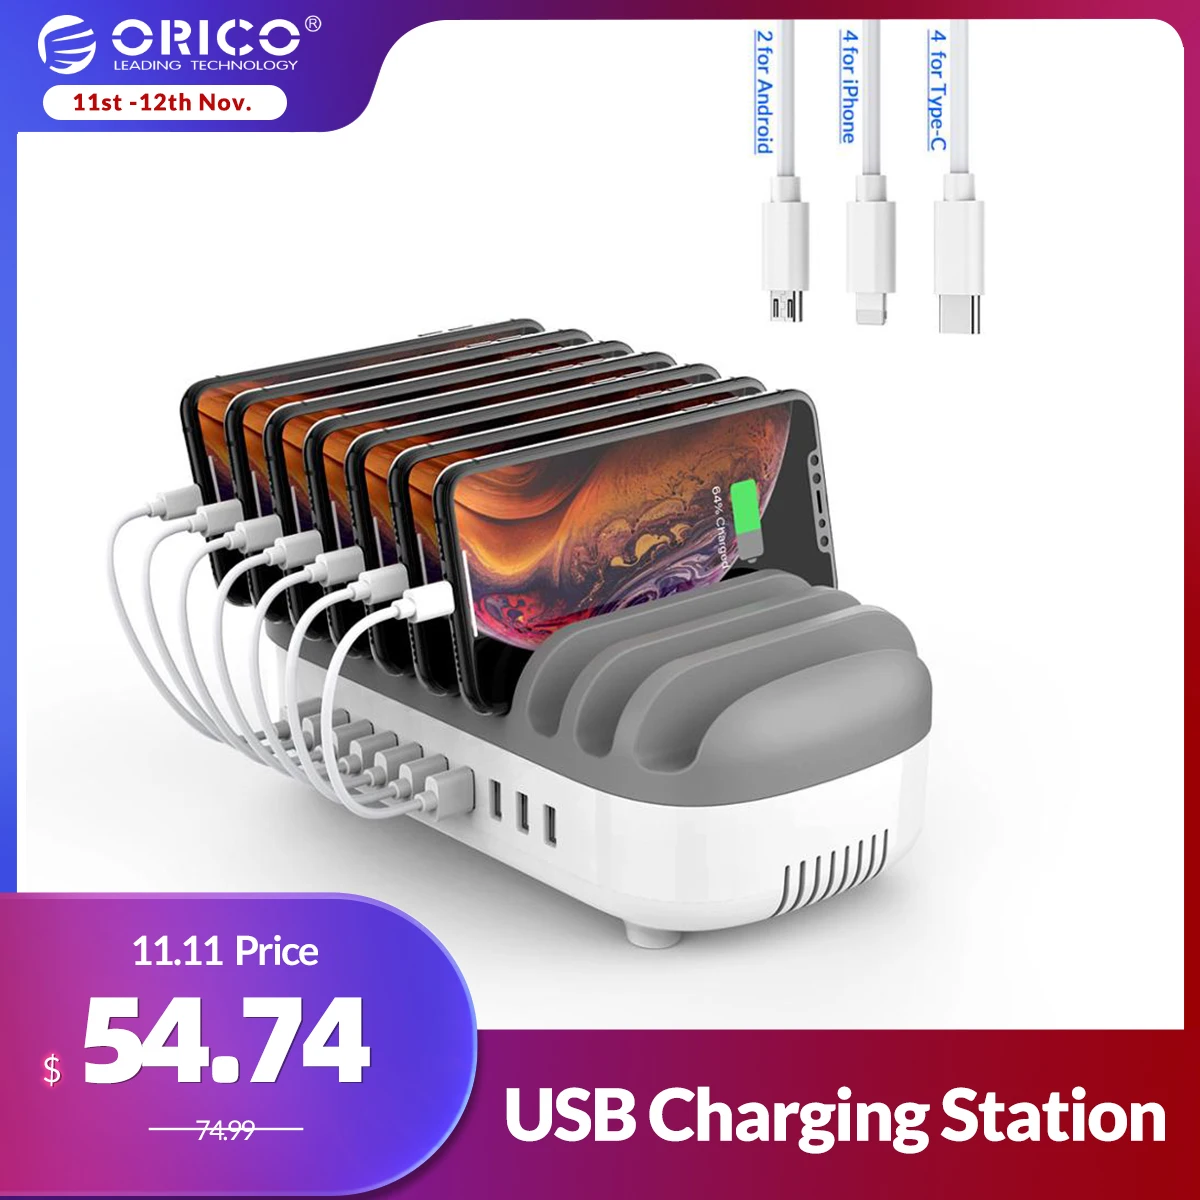 

ORICO 10 Ports USB Charging Station Dock USB Charger 120W 5V 2.4A for iPhone 12 Pro Max Samsung Xiaomi Phone Tablet